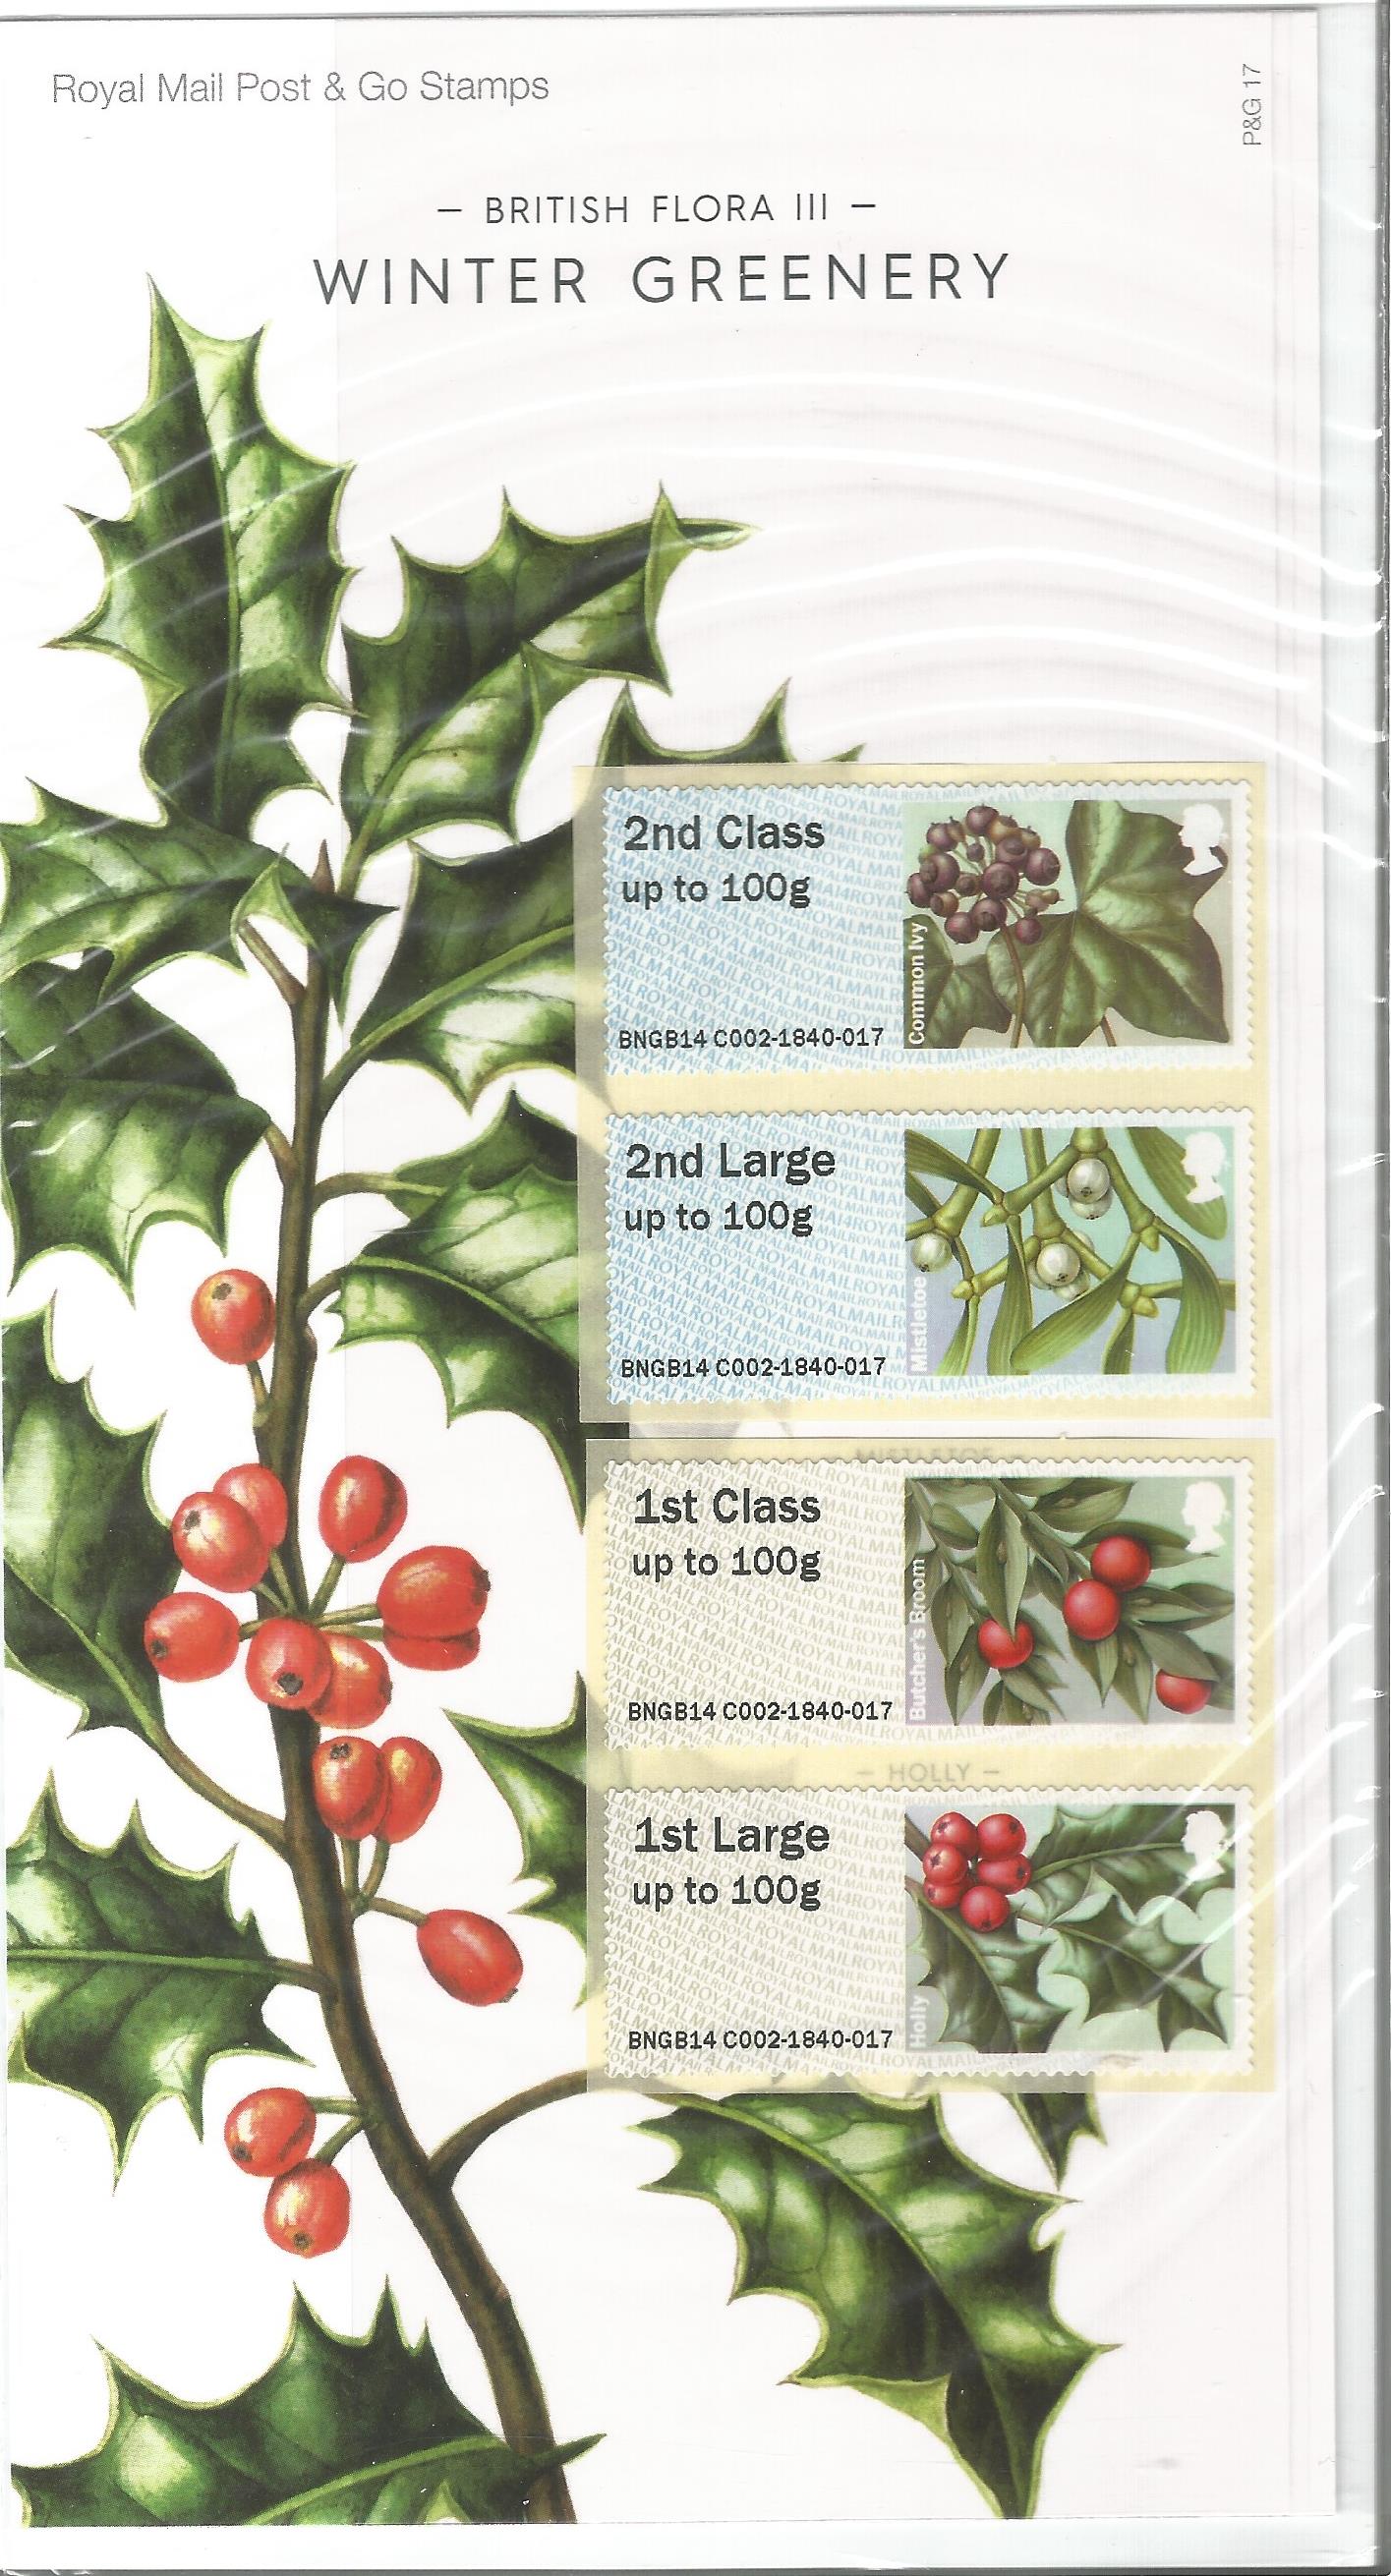 Royal Mail Post & Go Labels Collectors Pack no 17 British Flora II Winter Greenery 2014. Good